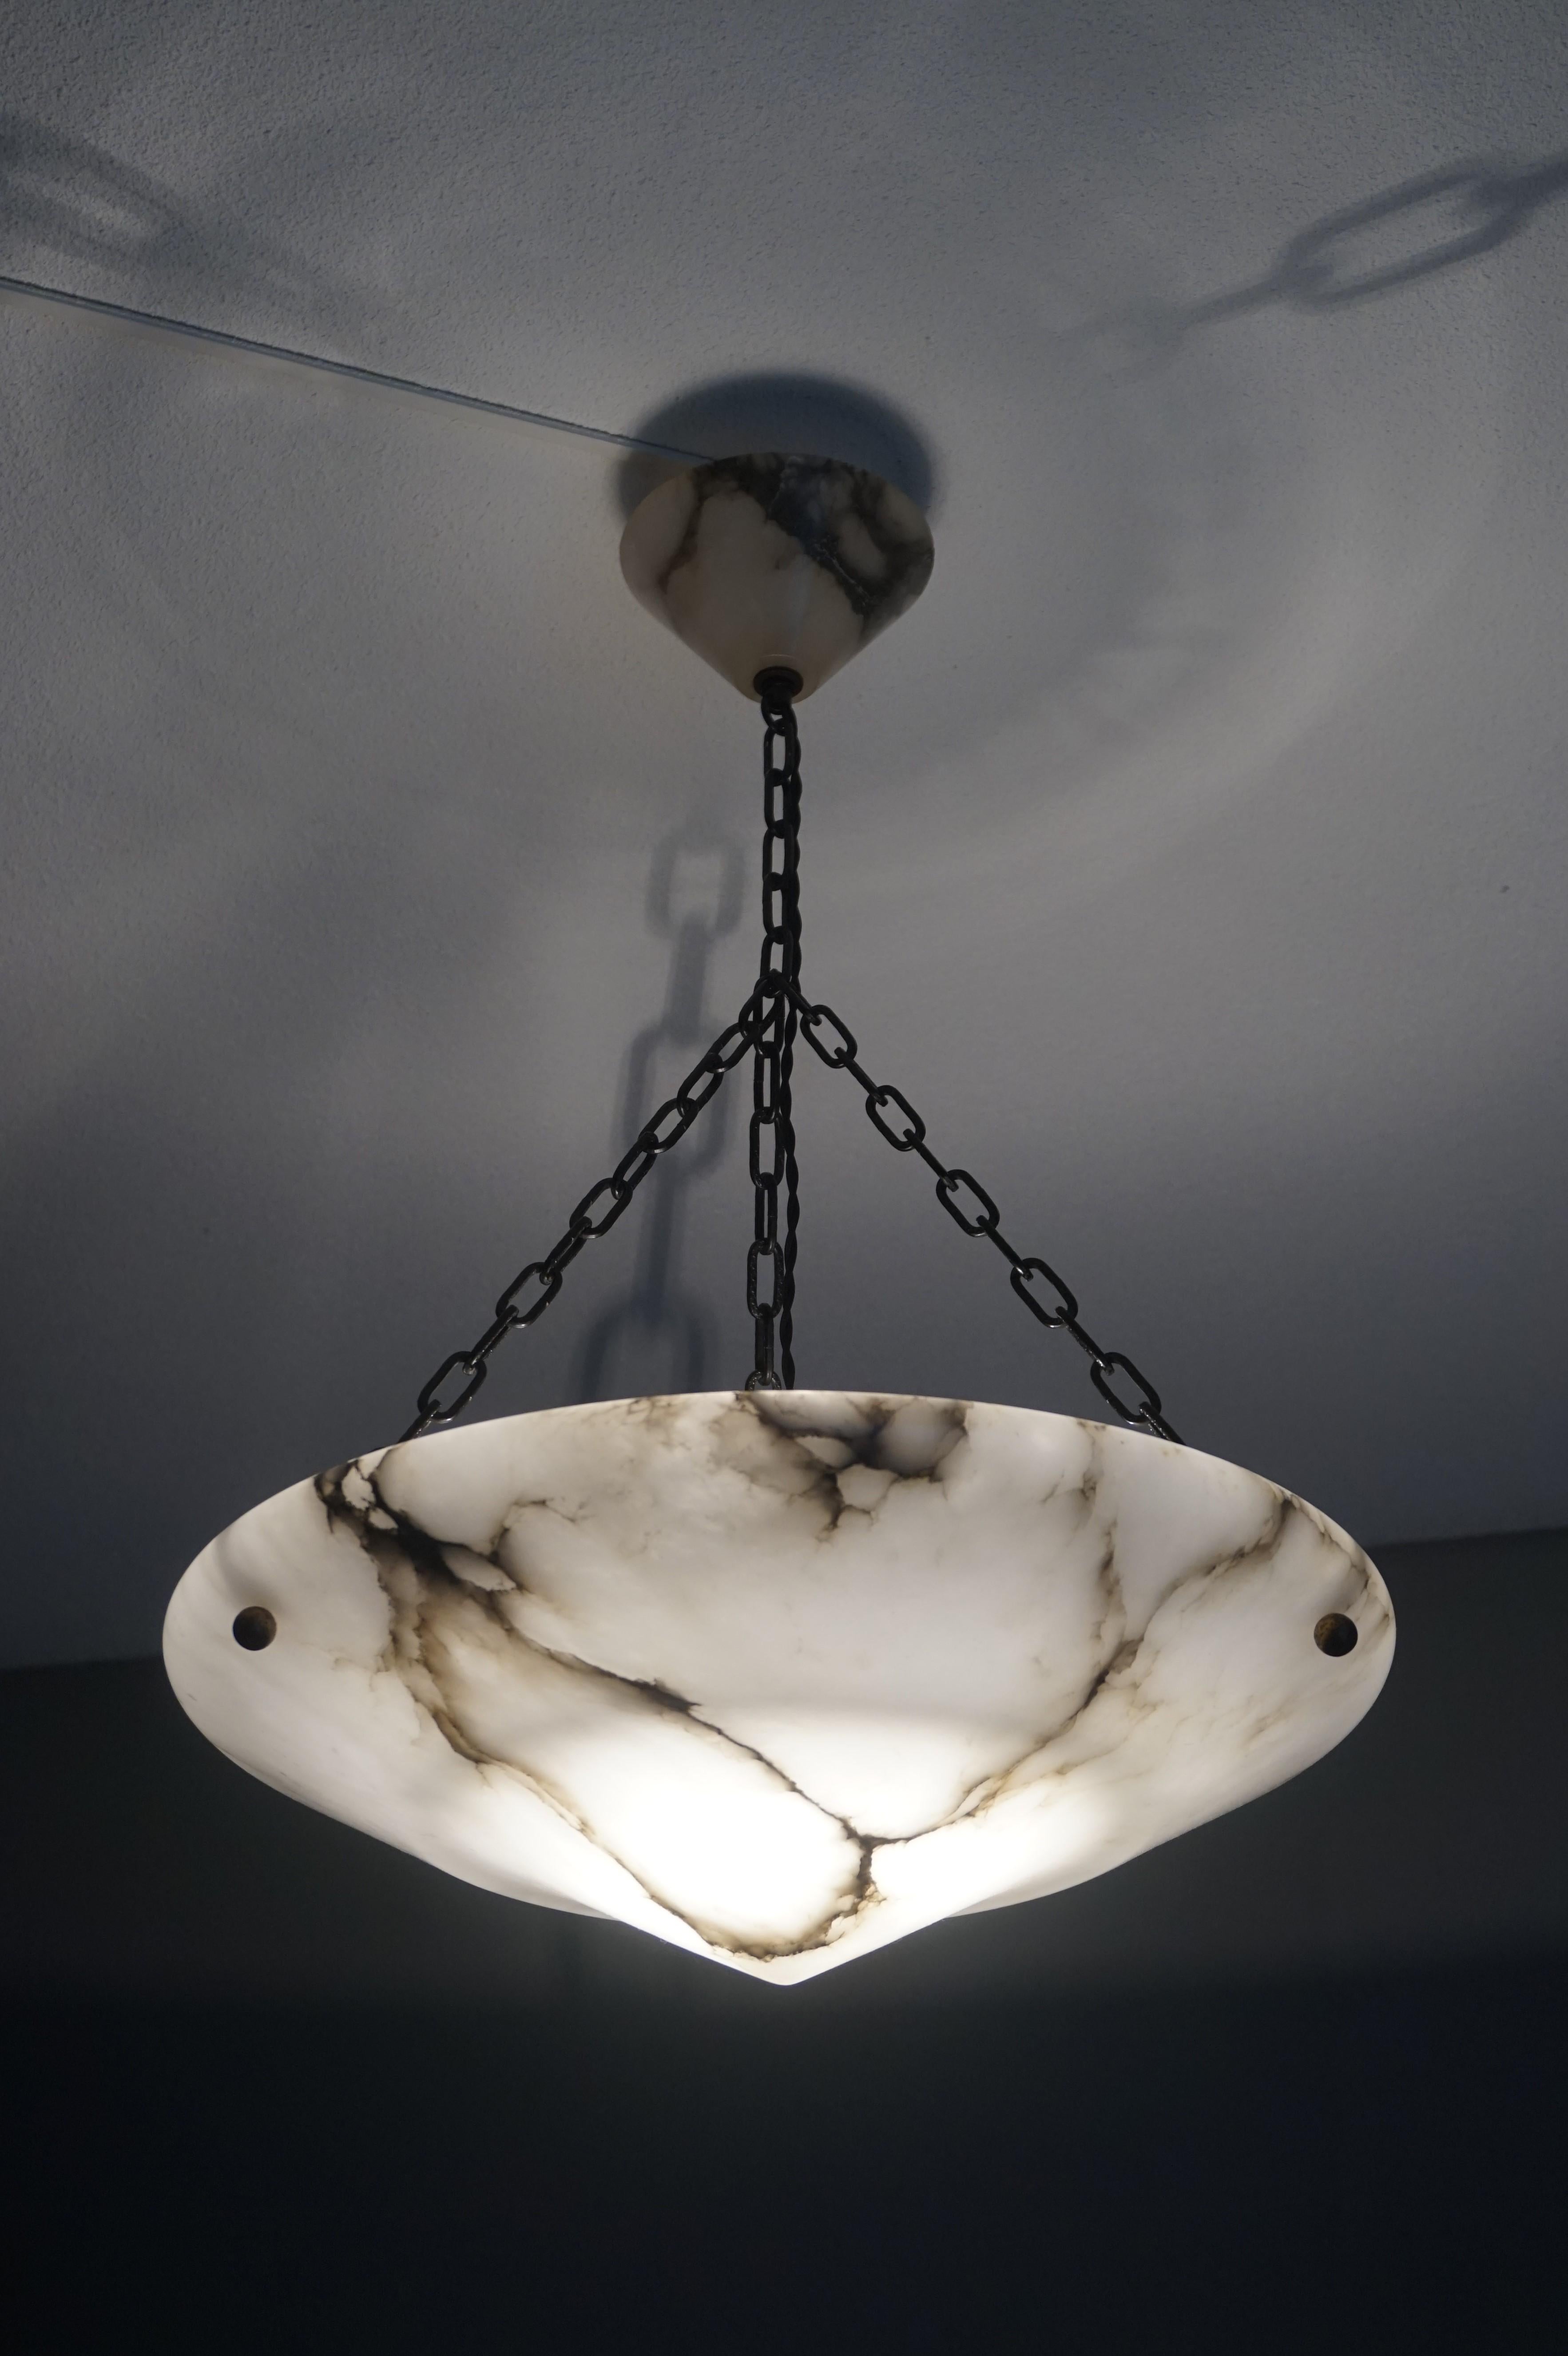 Perfect size, great design and superb condition Art Deco light fixture.

With early 20th century lighting being one of our specialties, we were immediately impressed with the size, shape and excellent condition of this alabaster chandelier. Over the